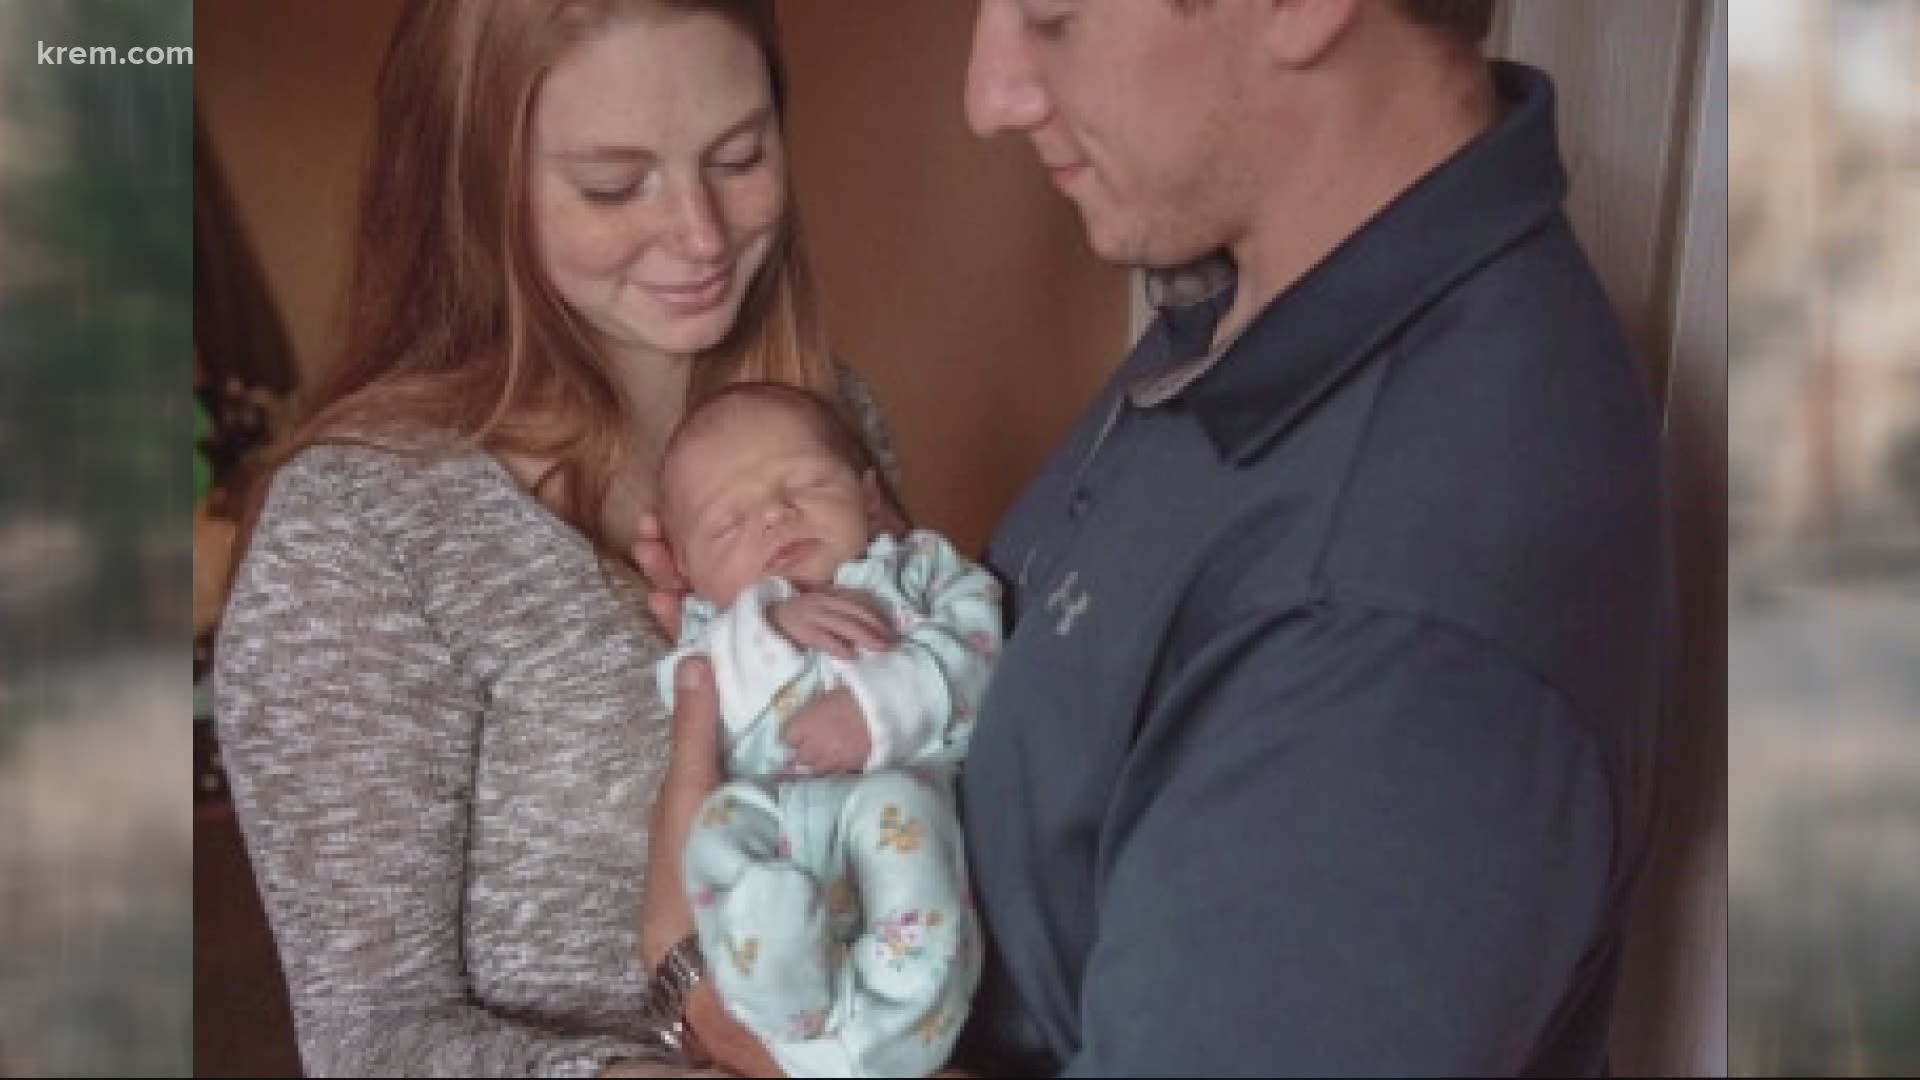 Haley and Christian Hall are new parents. On top of the hectic craze of having their first child, it all happened during the coronavirus pandemic.